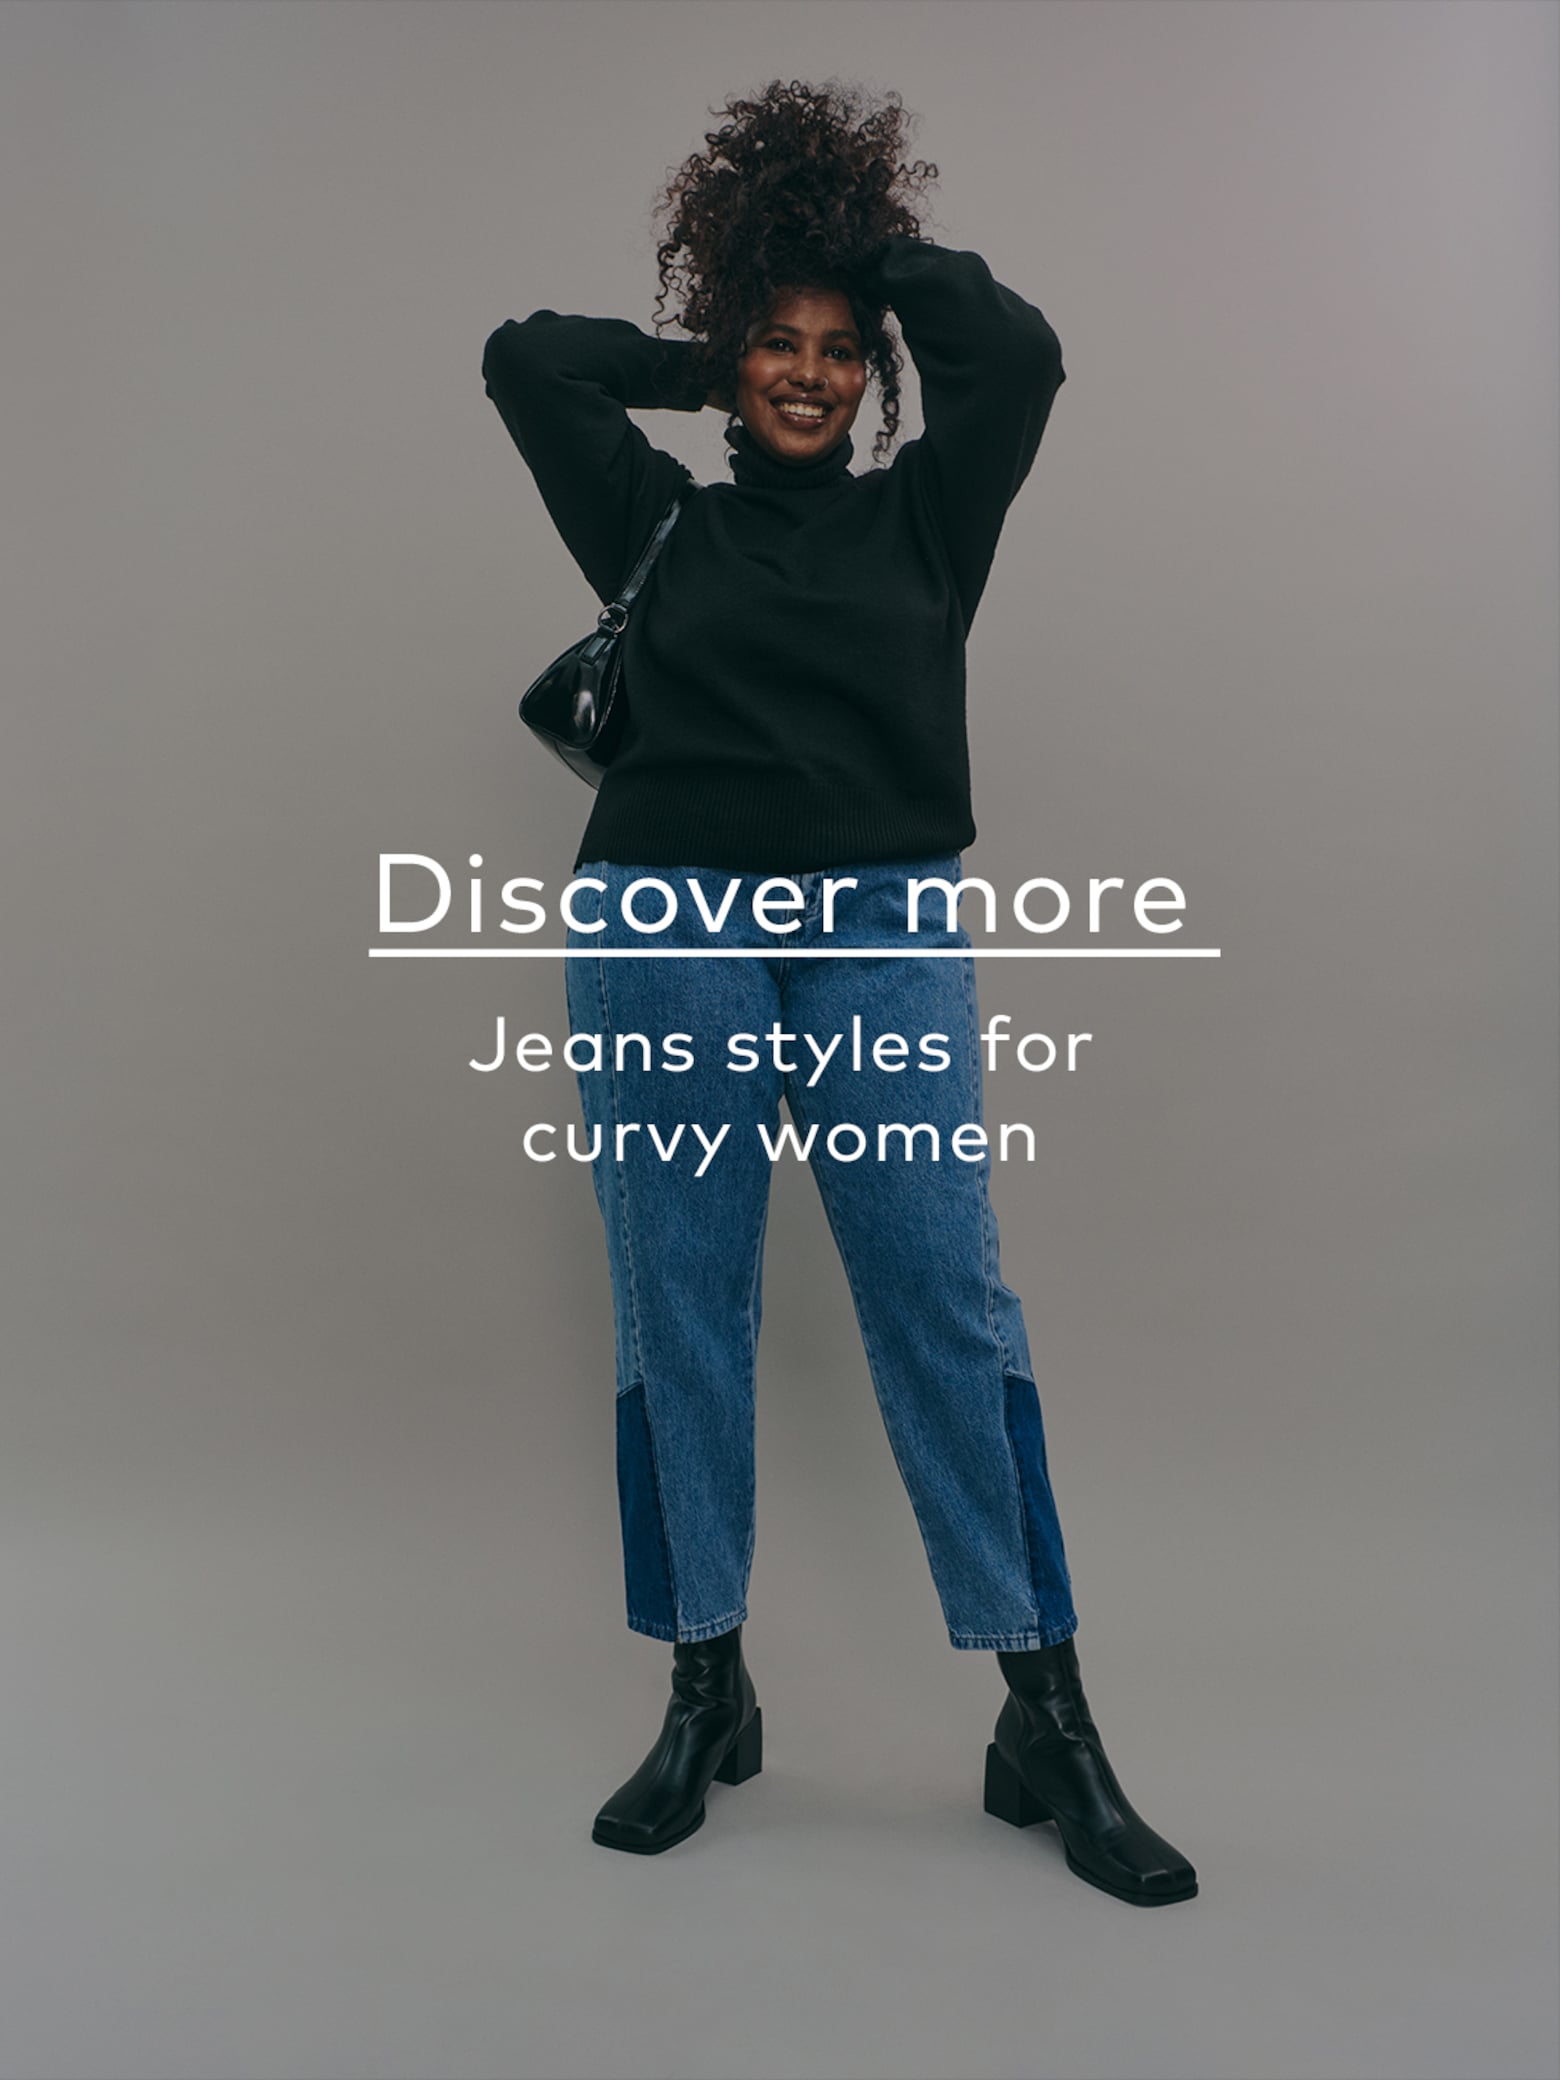 Anything but ordinary Jeans styles for all figures